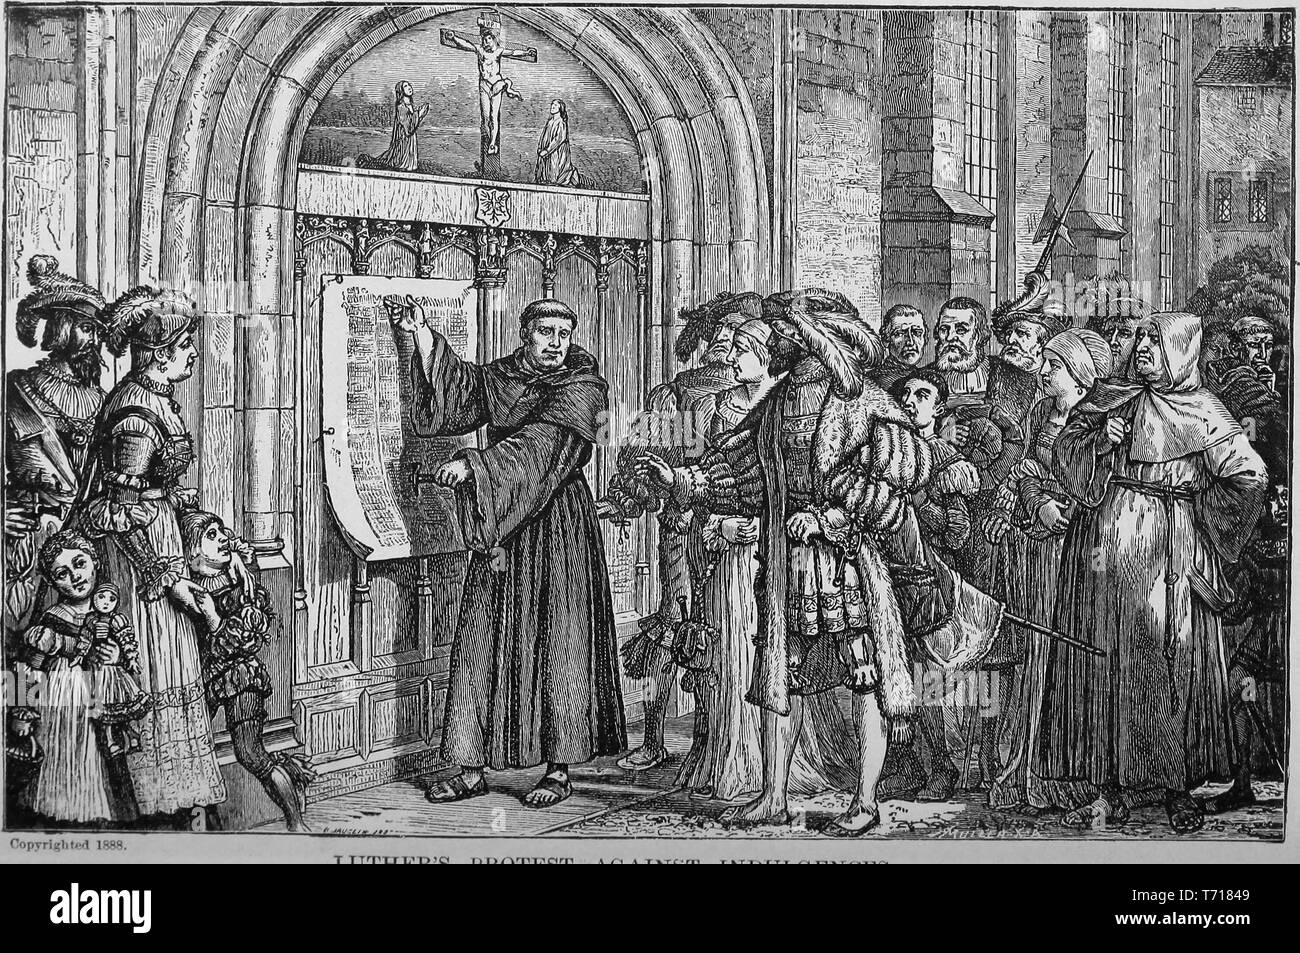 Engraving of Martin Luther's protest against the sale of indulgences, from the book 'The Great Controversy: Between Christ and Satan During the Christian Dispensation' by Ellen Gould White, 1888. Courtesy Internet Archive. () Stock Photo